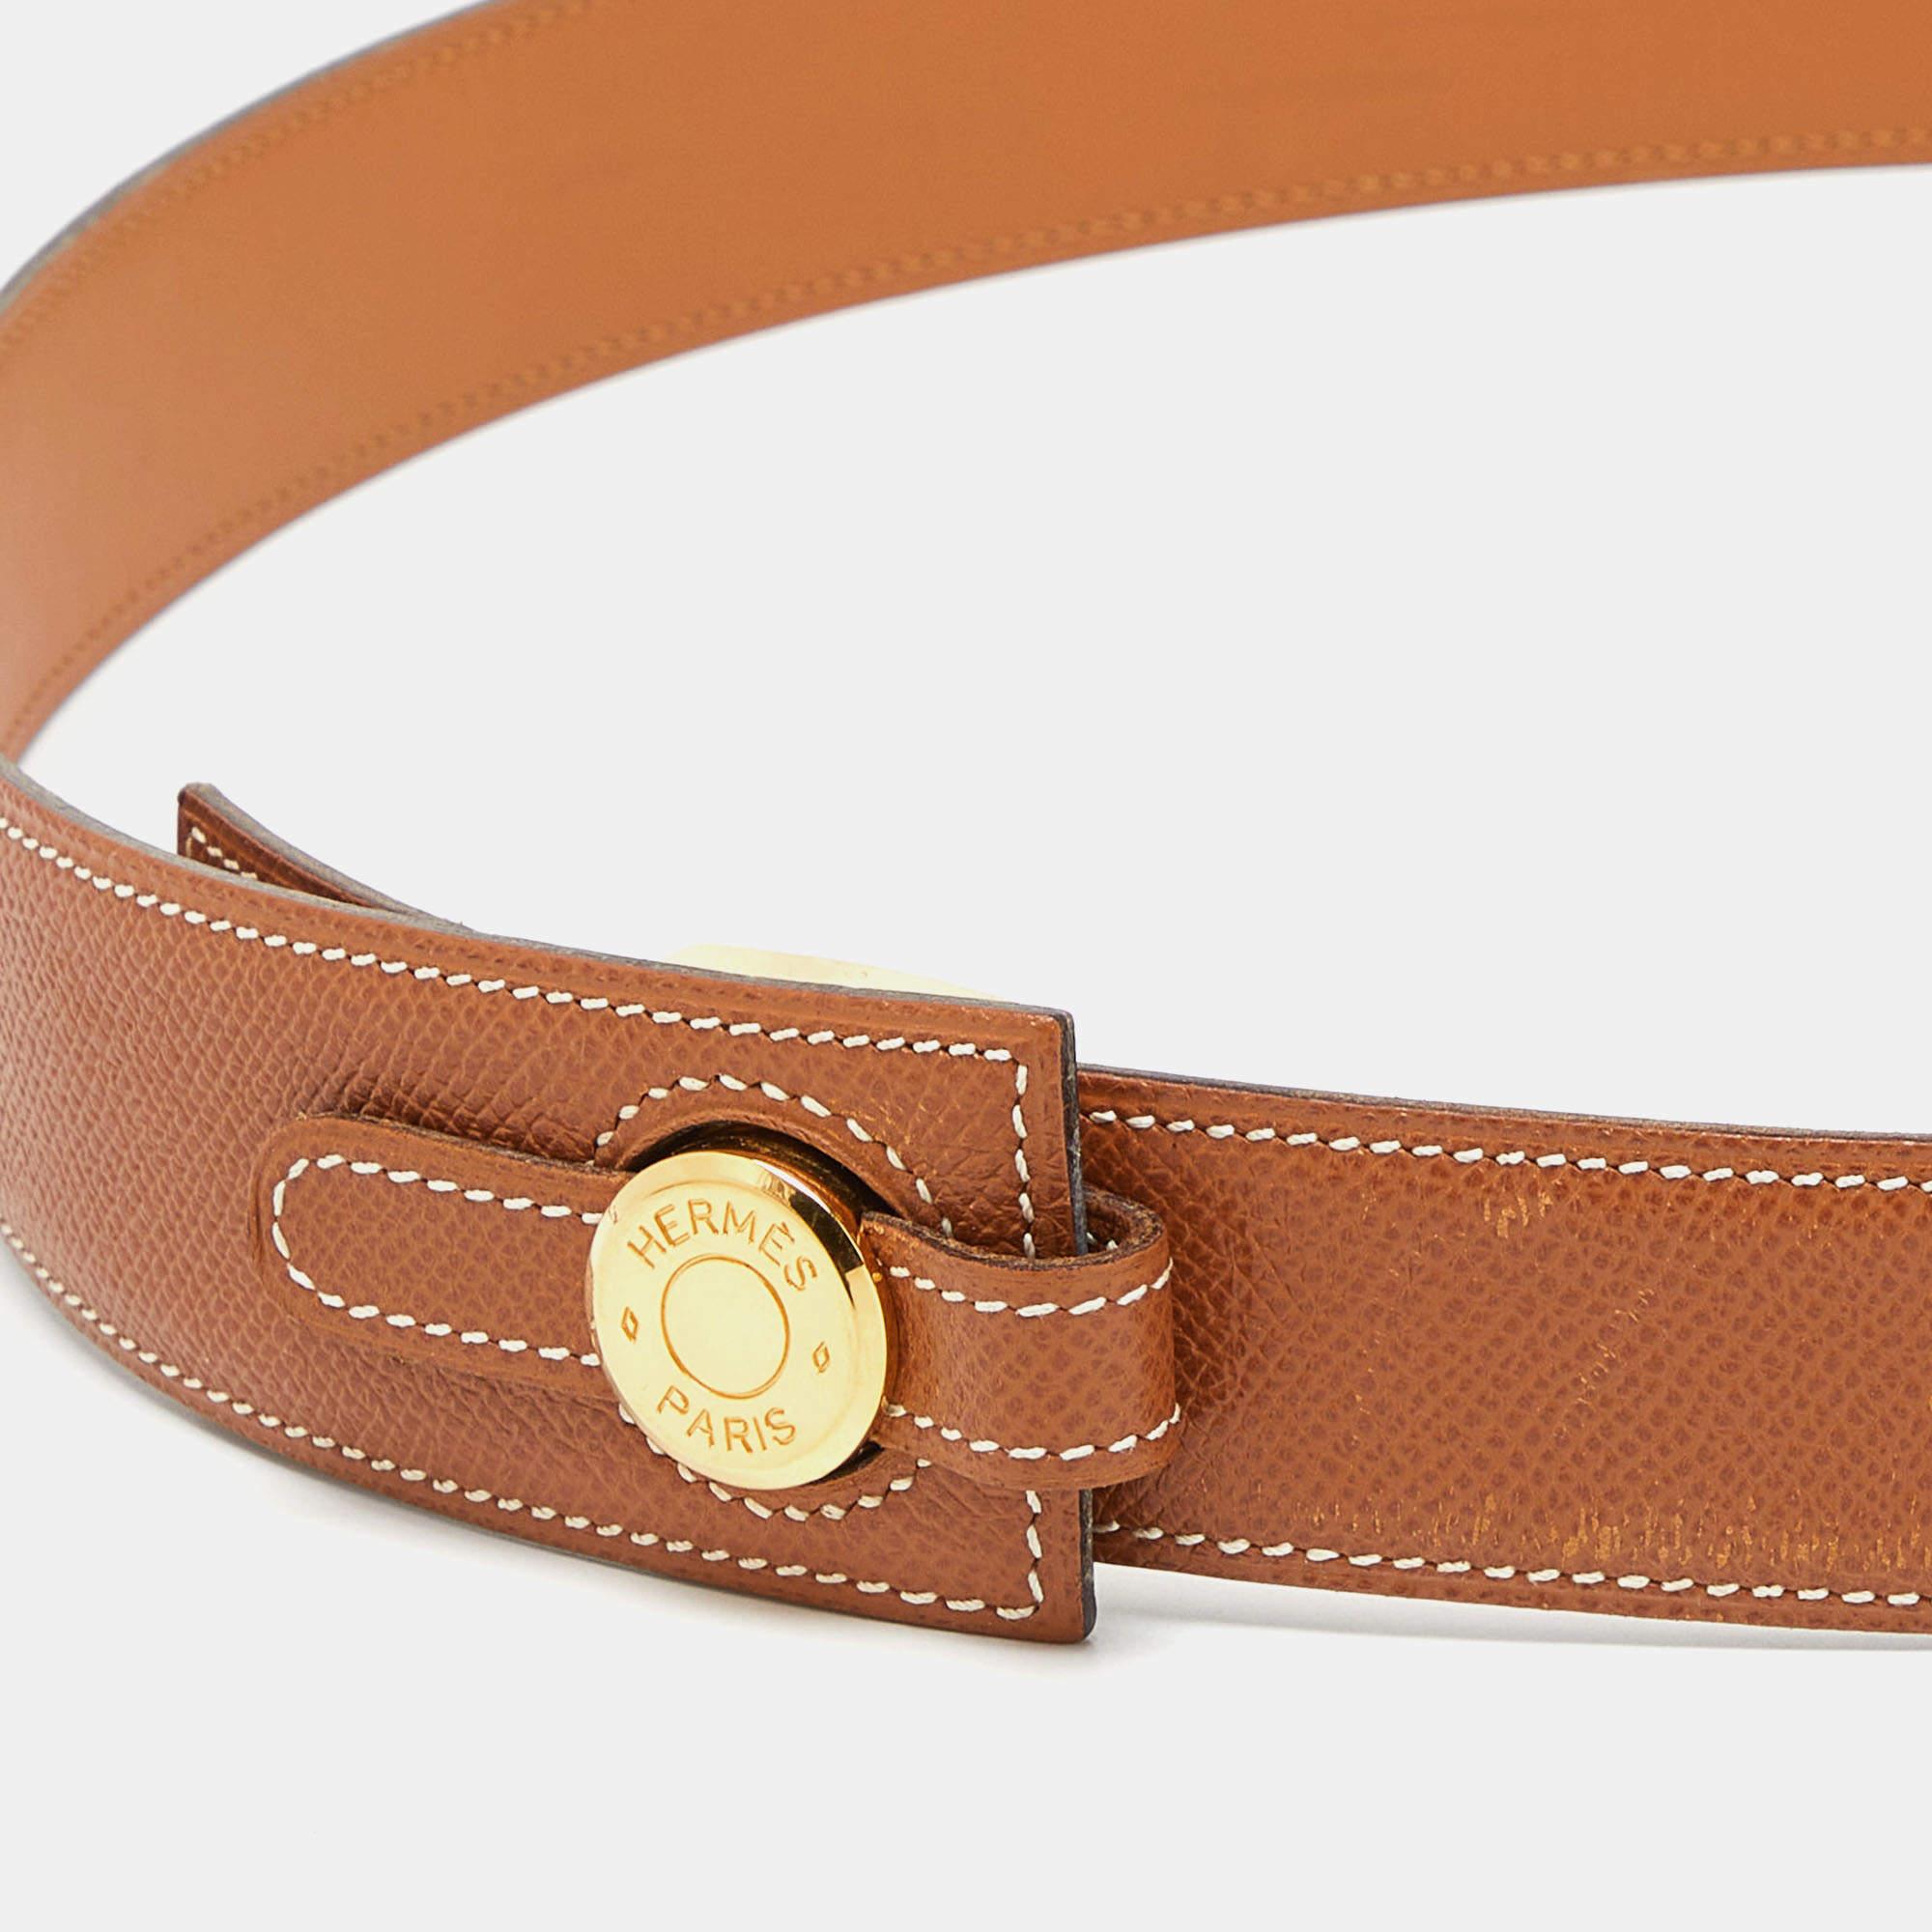 The Hermès Clou de Selle belt is a luxurious and eye-catching accessory. Crafted from Epsom leather, it features the buckle in gold-tone, showcasing elegance and sophistication in a versatile and stylish design.

